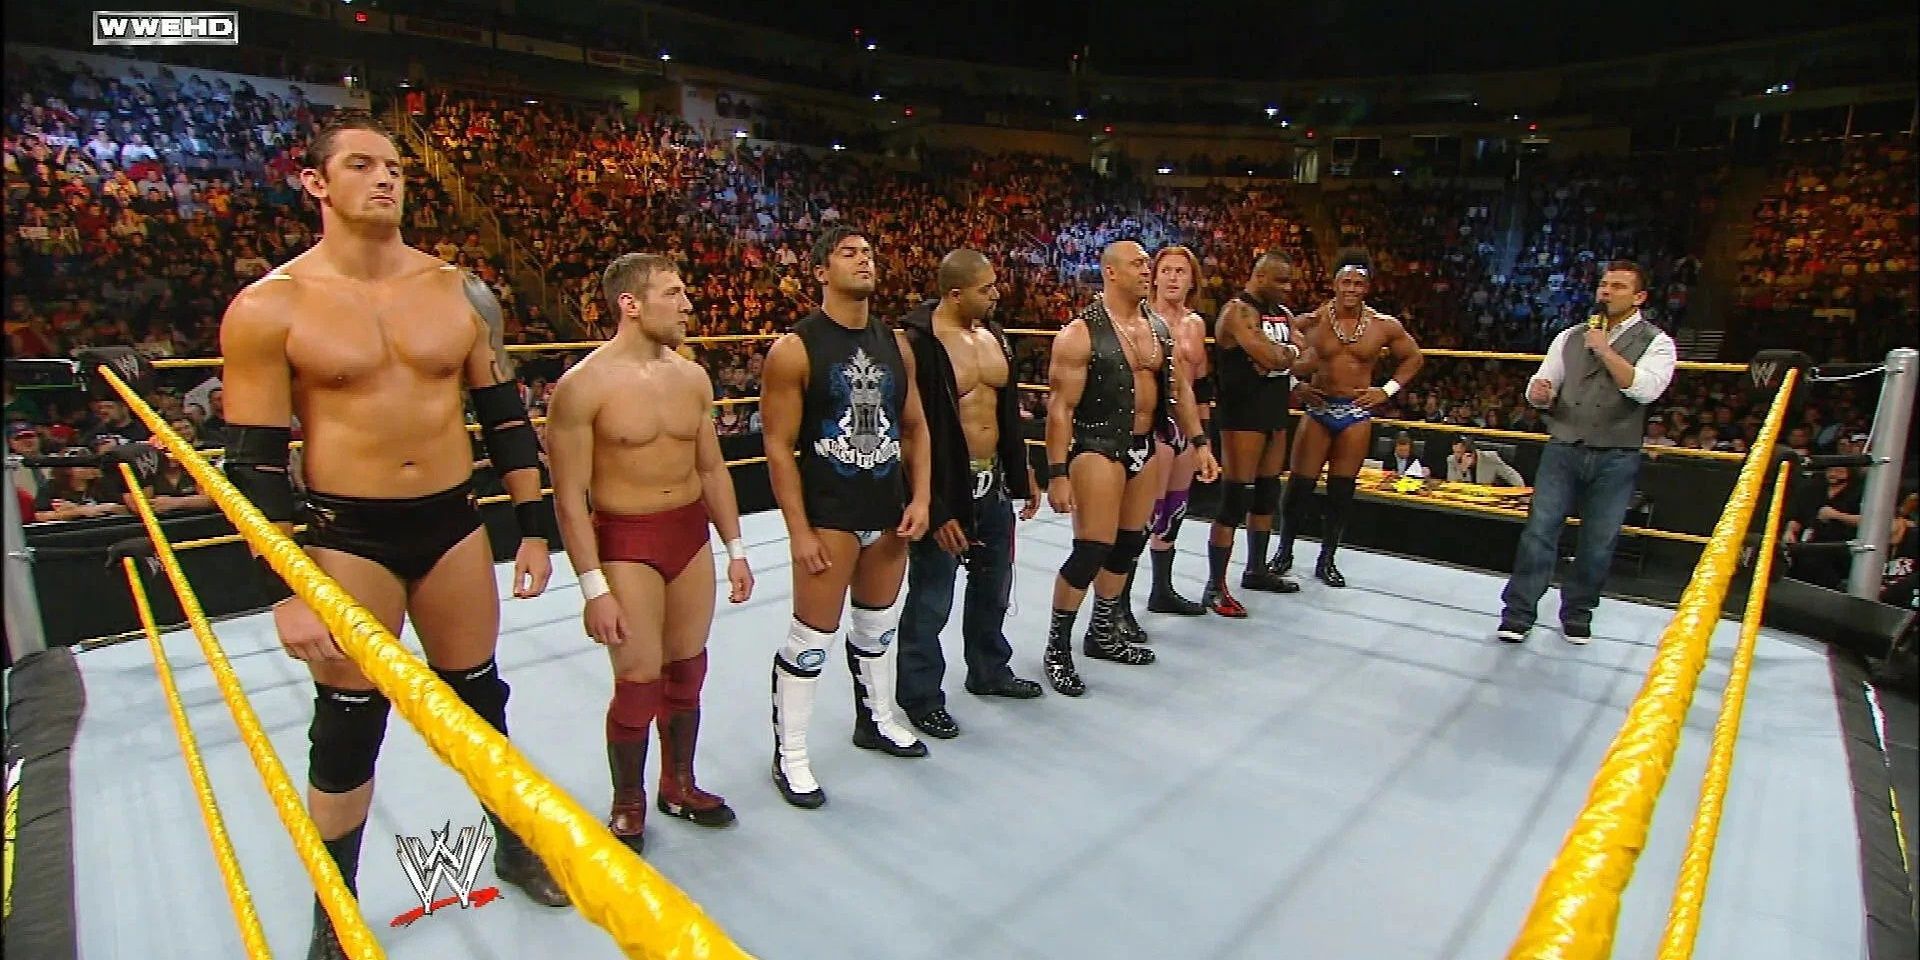 NXT rookies stood together 